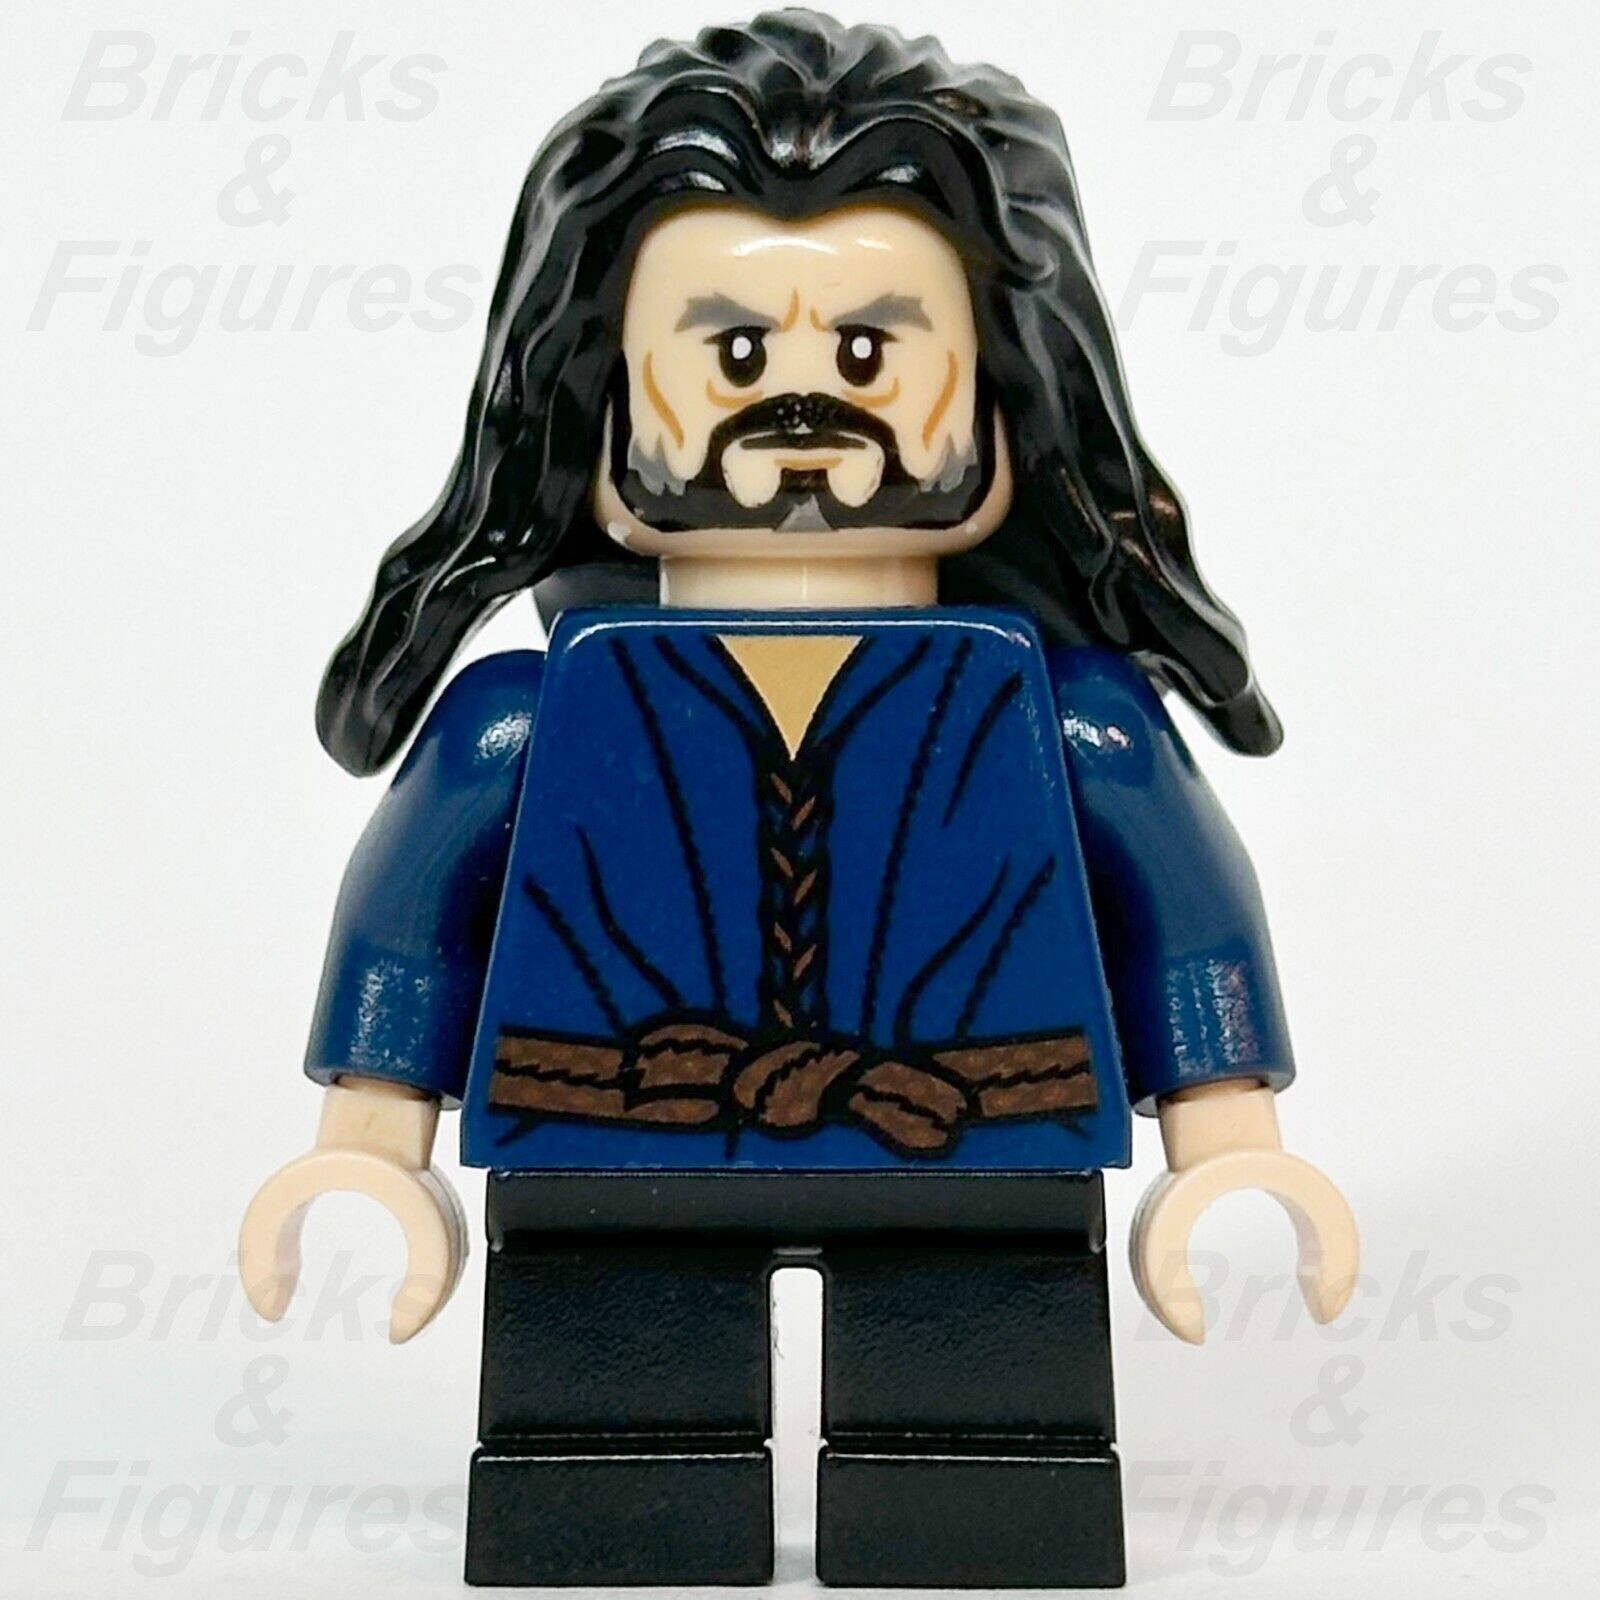 LEGO Thorin Oakenshield Minifigure The Hobbit Lord of the Rings 79013 lor083